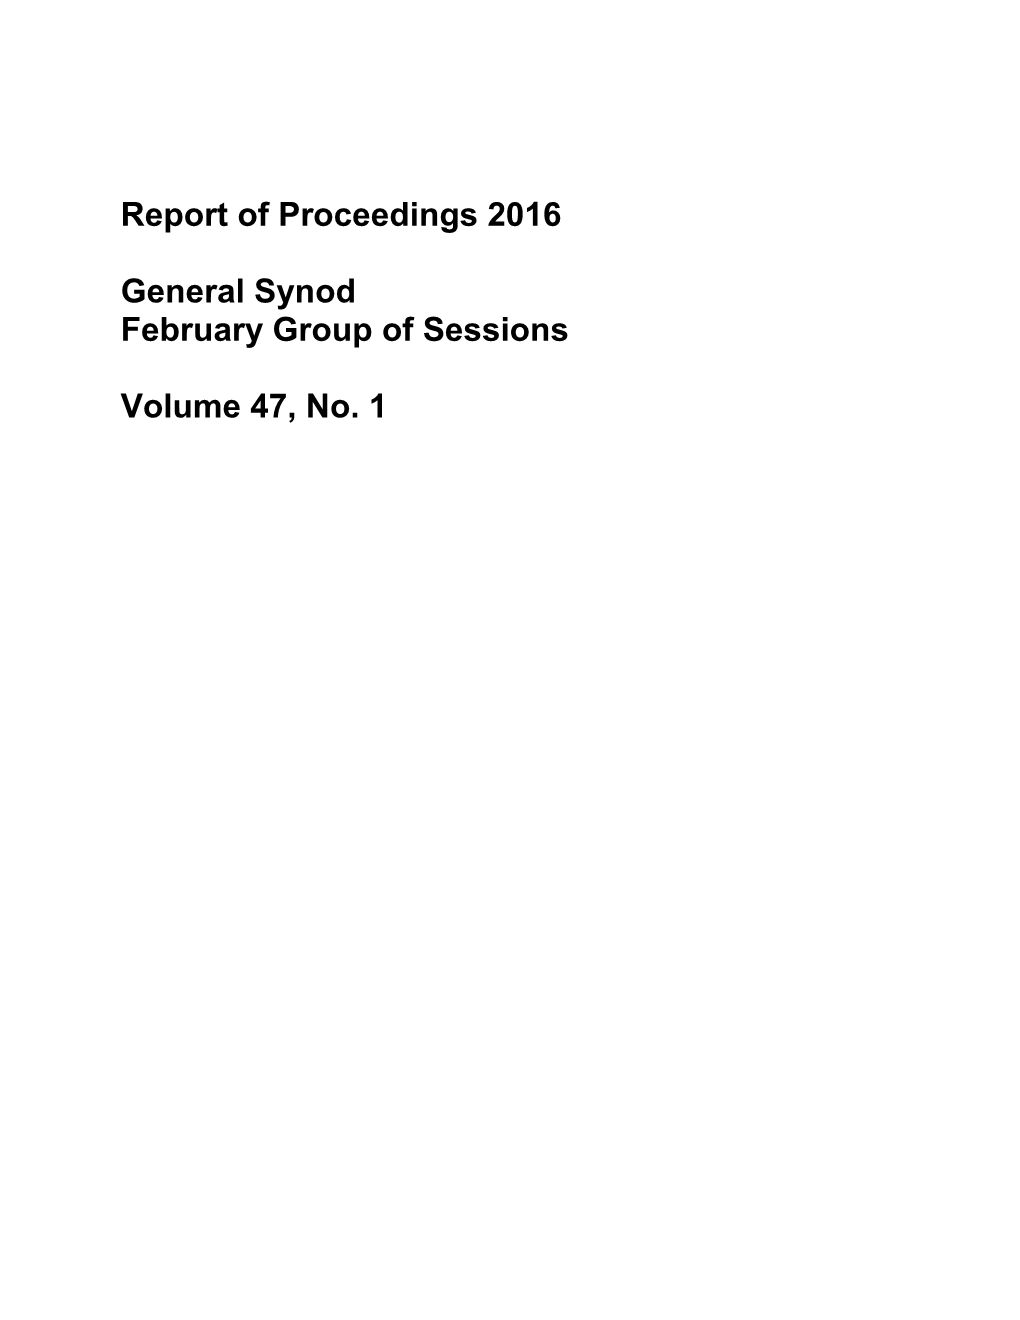 Report of Proceedings 2016 General Synod February Group of Sessions